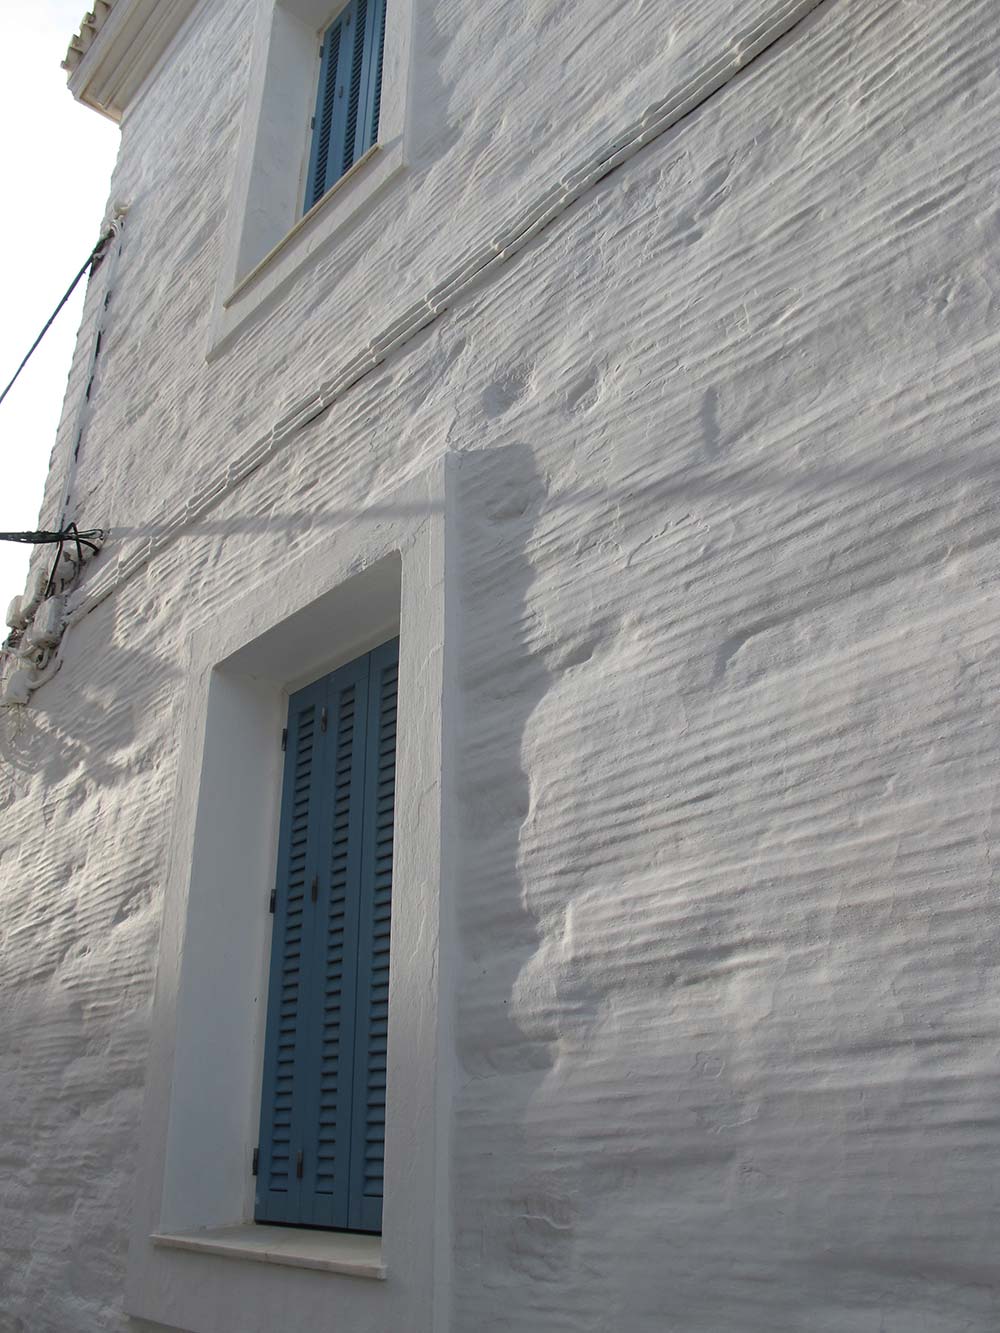 An Andros house with corrugated and white-washed rendering